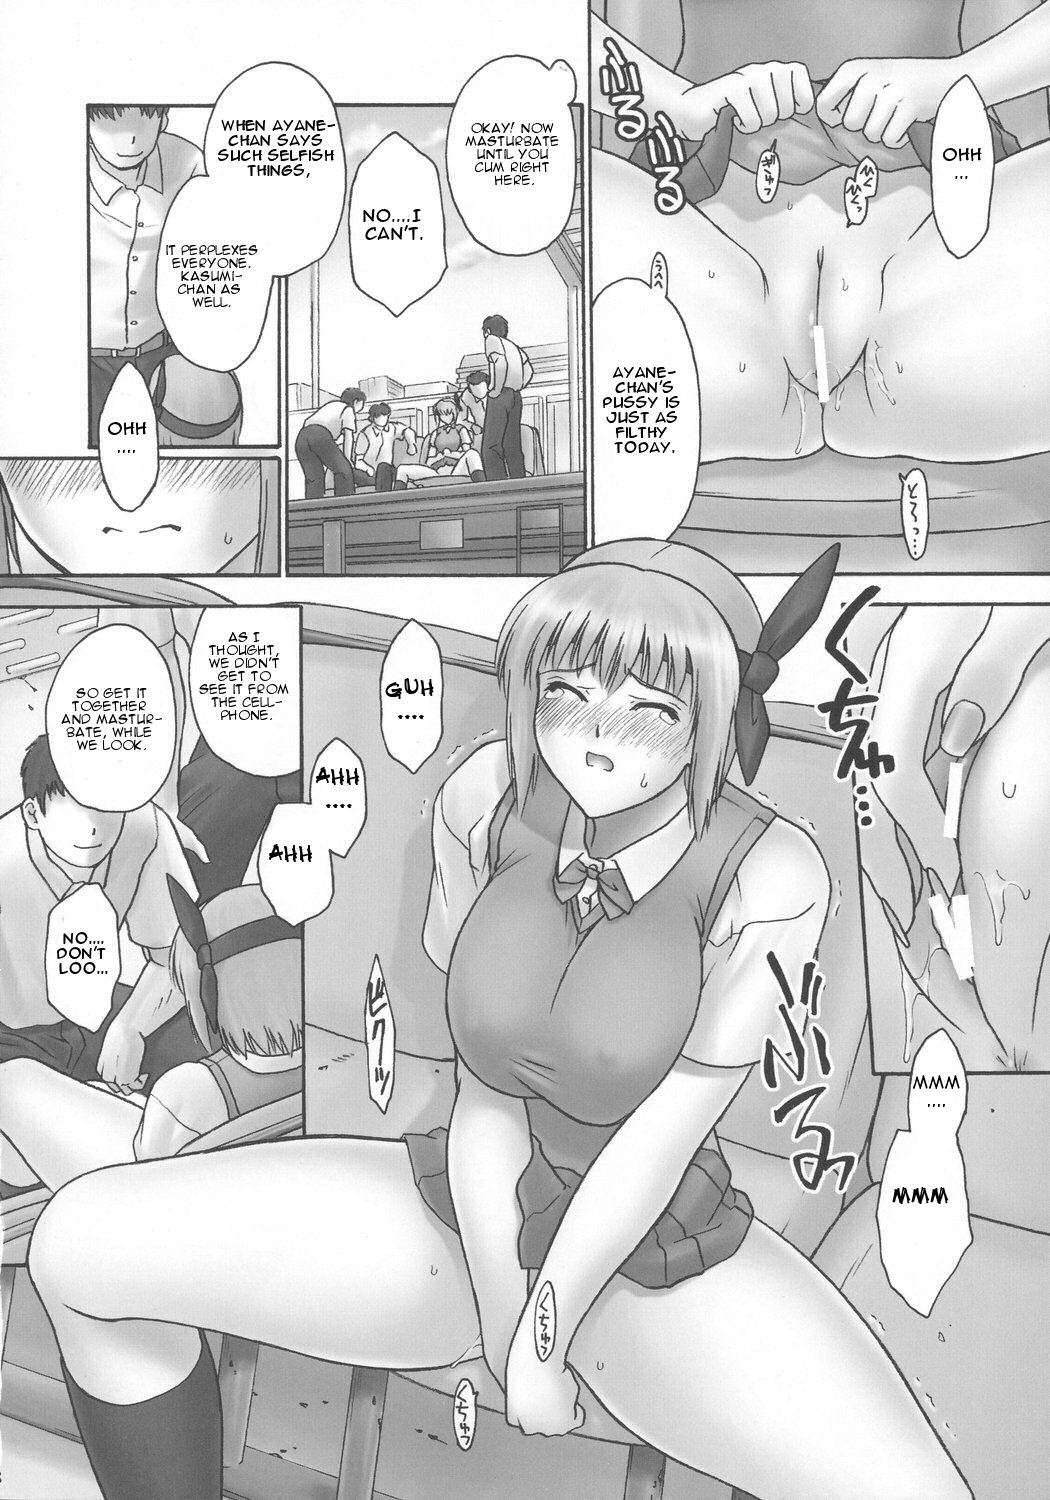 REI CHAPTER 05：INDECENT 02 16